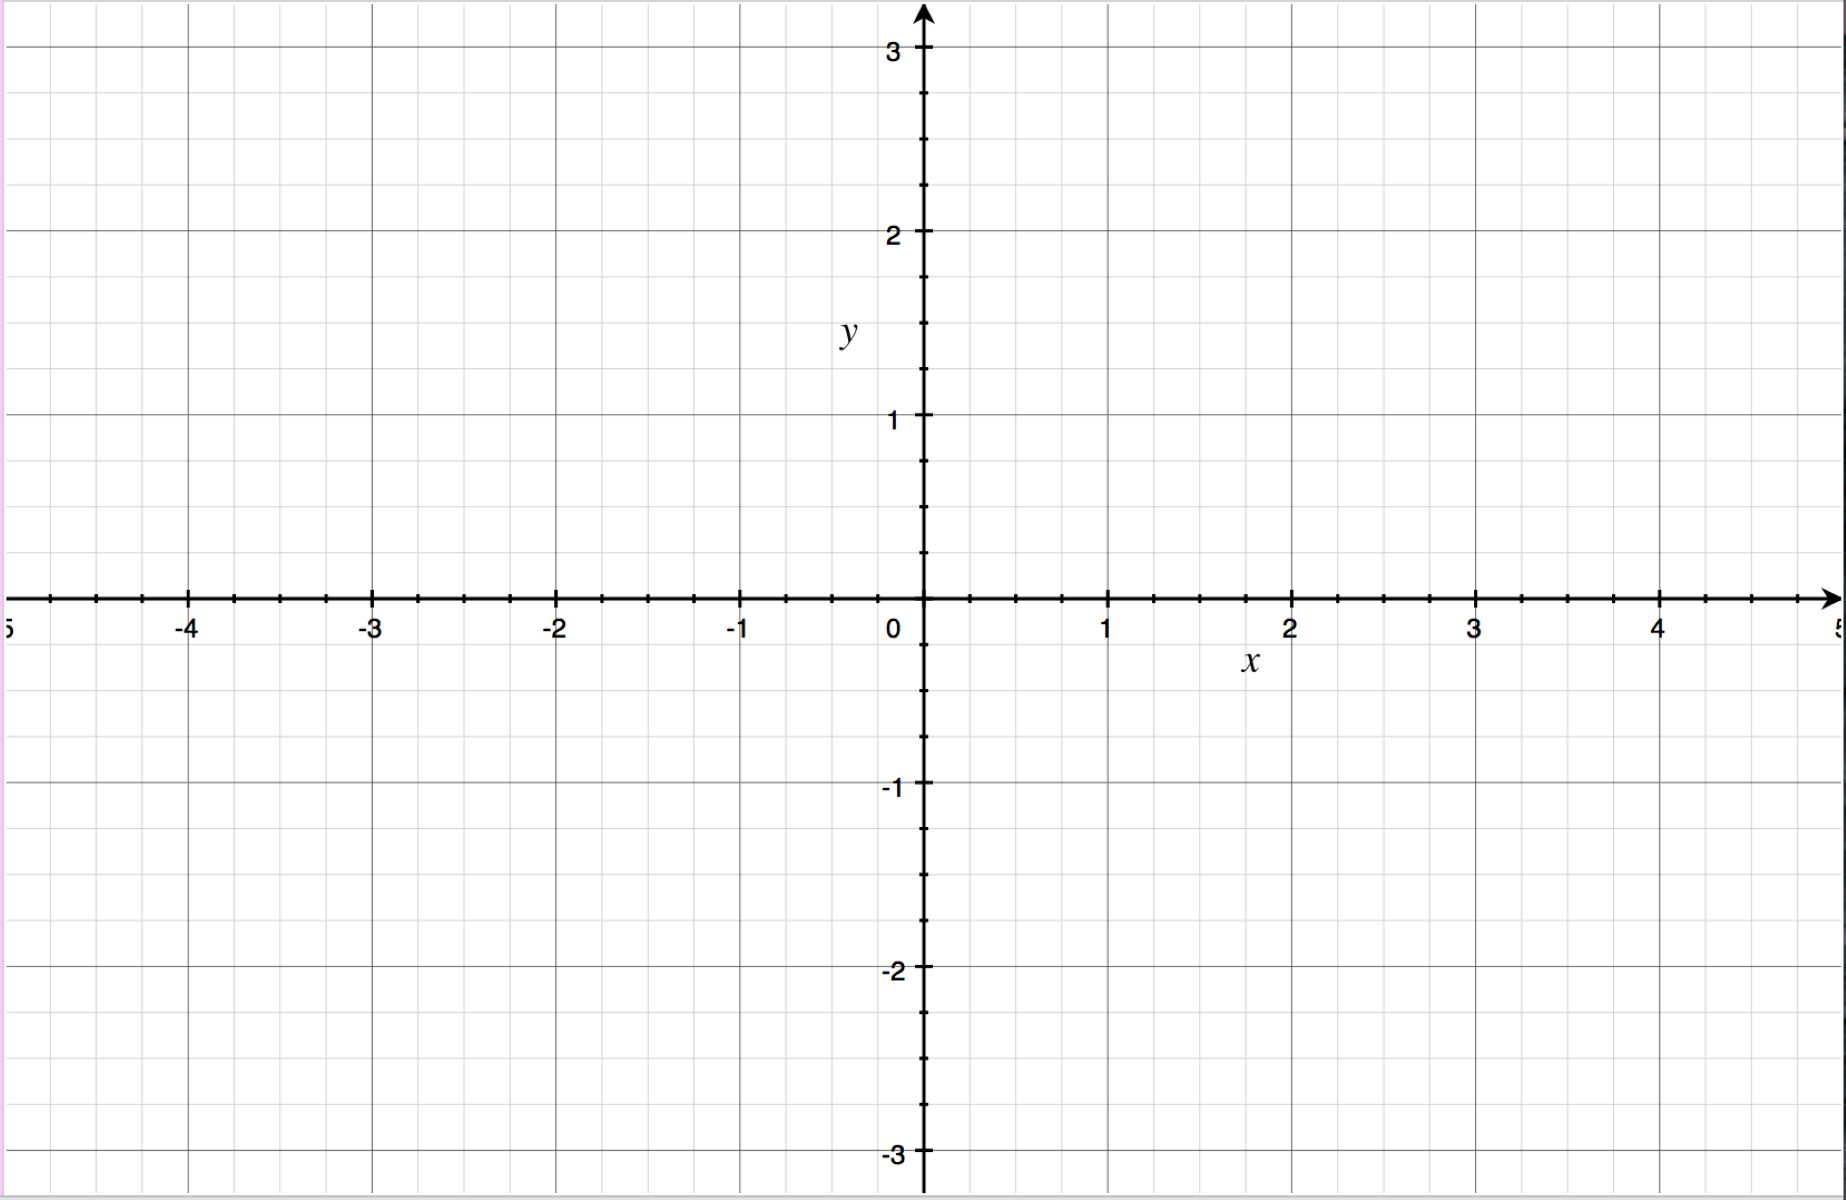 The Mind-Blowing Graph With An Unbelievable Axis Of Symmetry At X = 3!